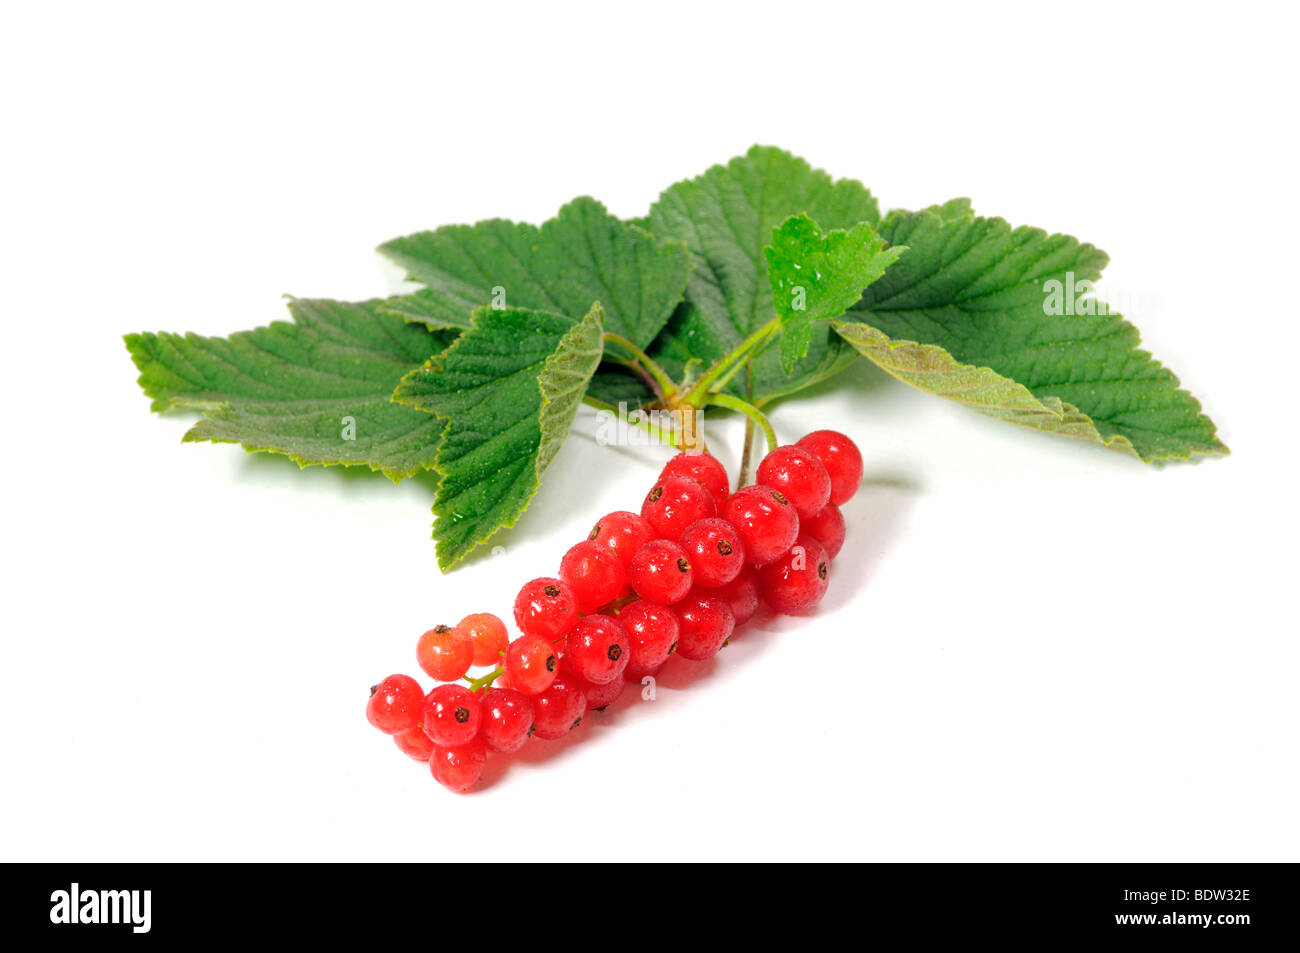 Fresh Redcurrant berries (Ribes rubrum) with leaves Stock Photo